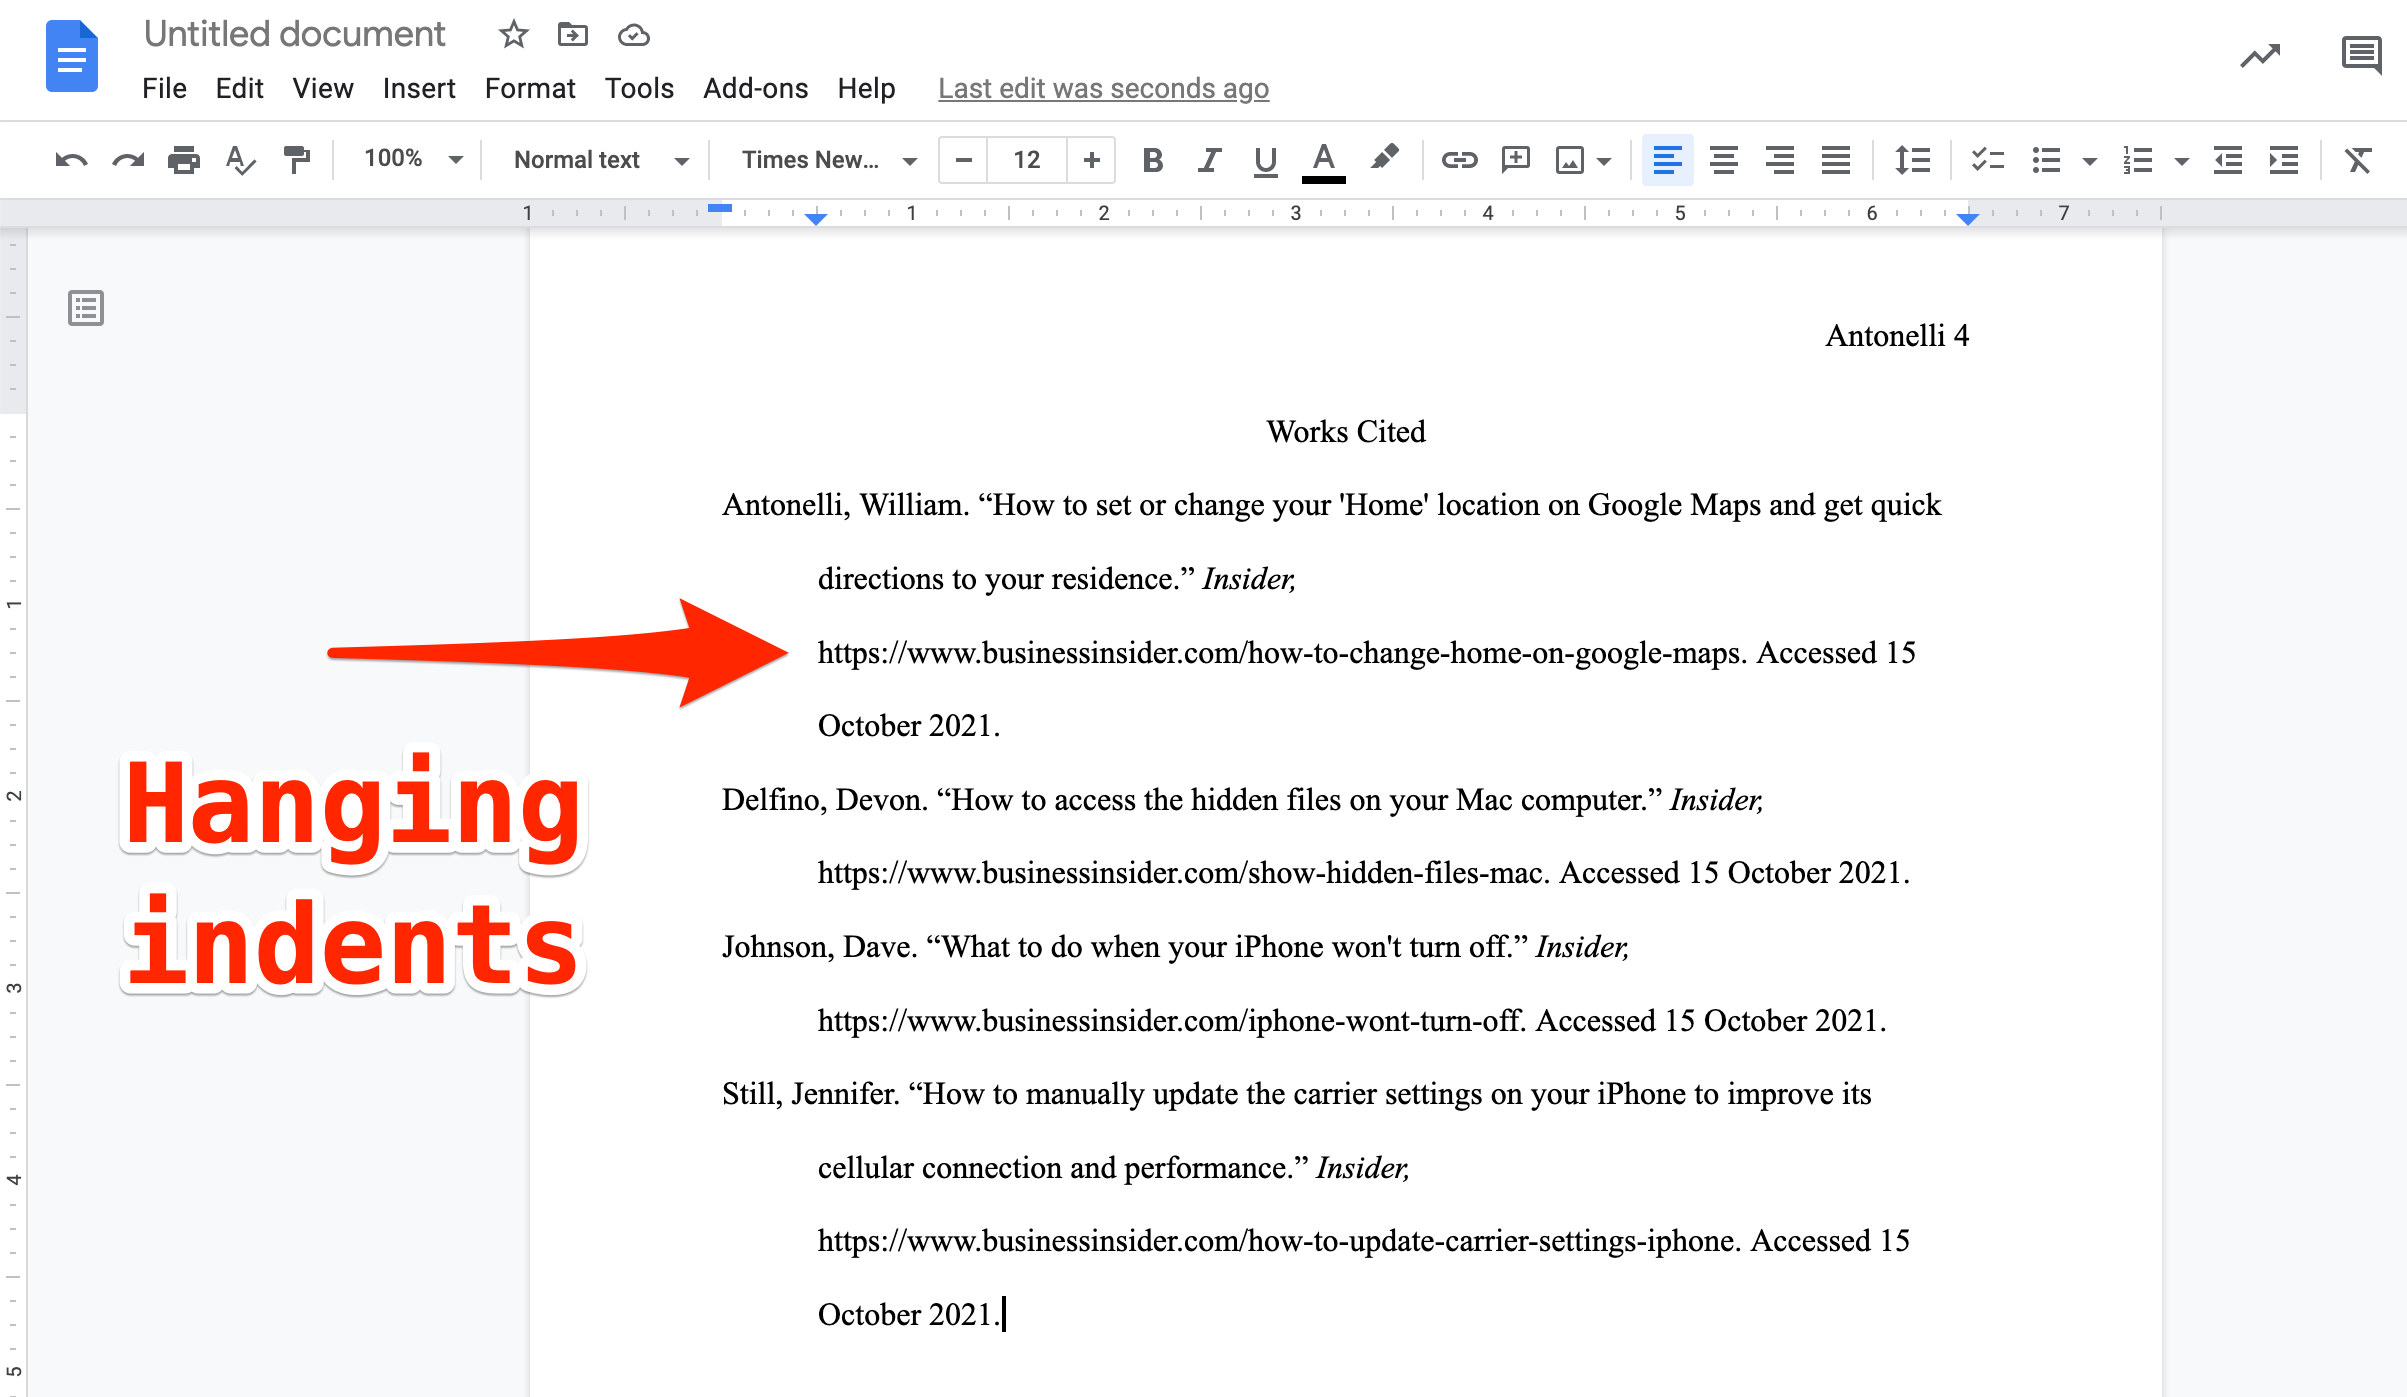 An MLA works cited page in Google Docs.